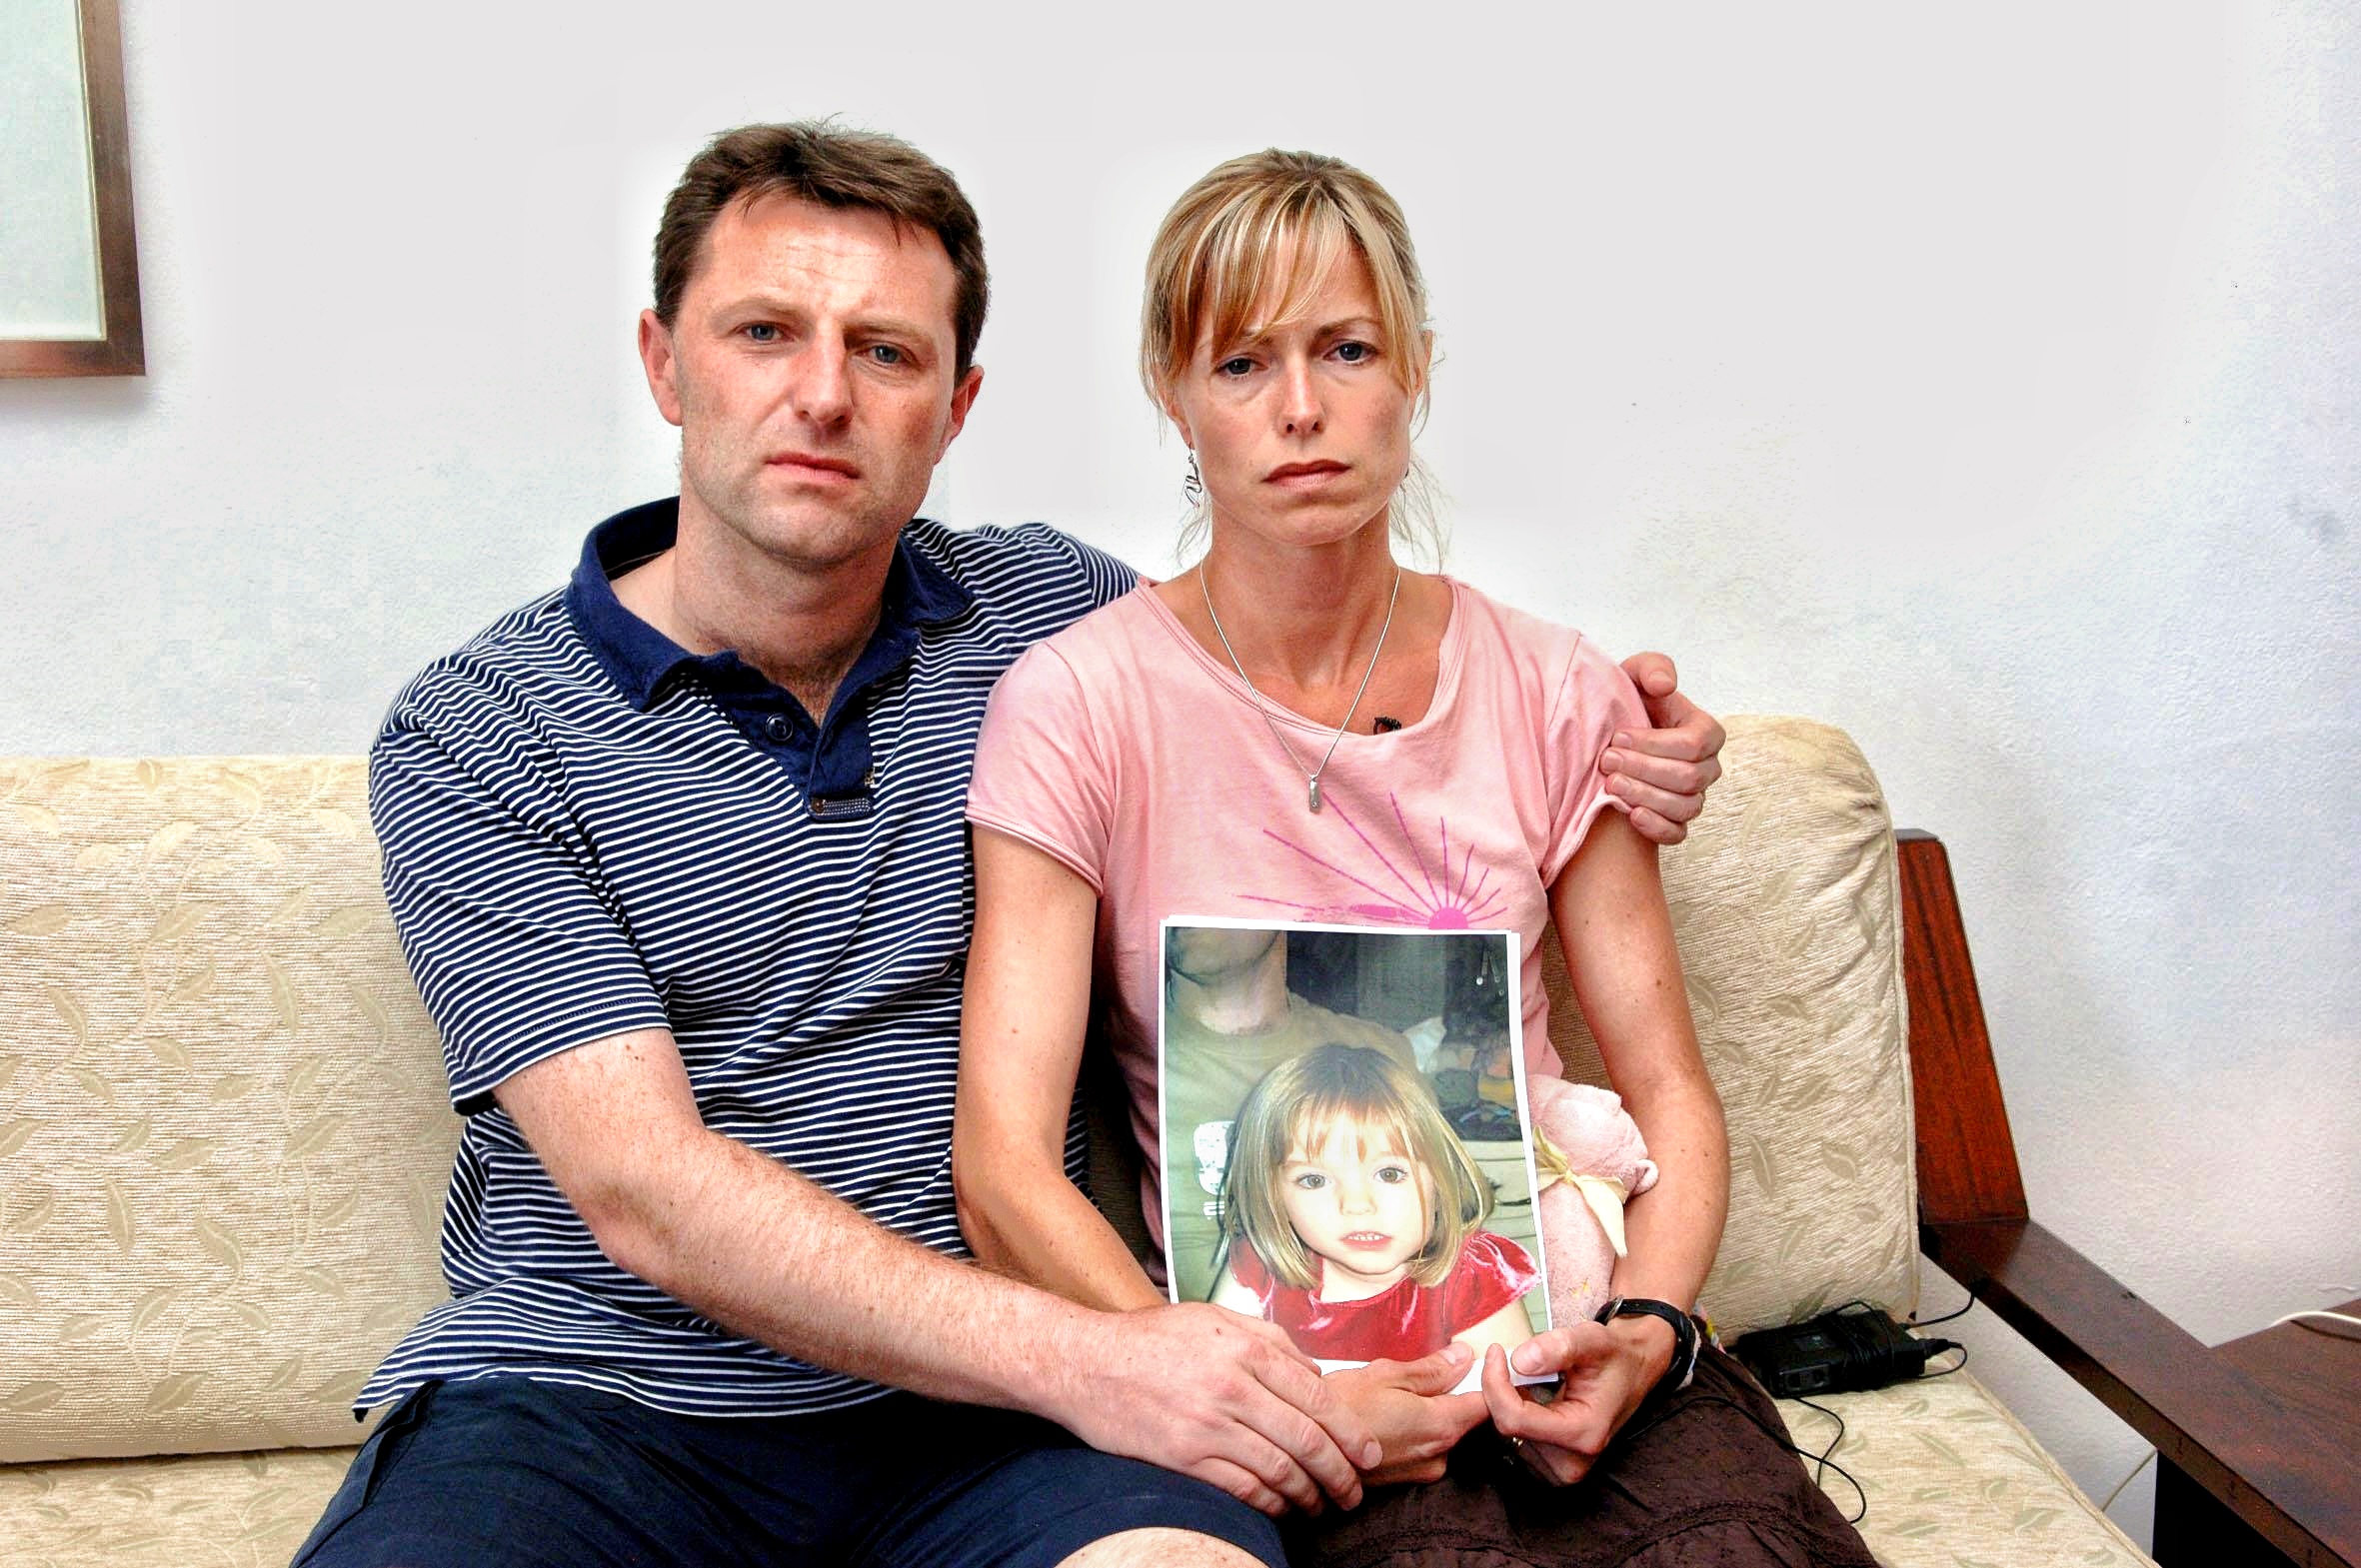 The Polish Woman Who Claims She Is Missing British Toddler Madeleine McCann Has Got Her DNA Results And It’s Negative